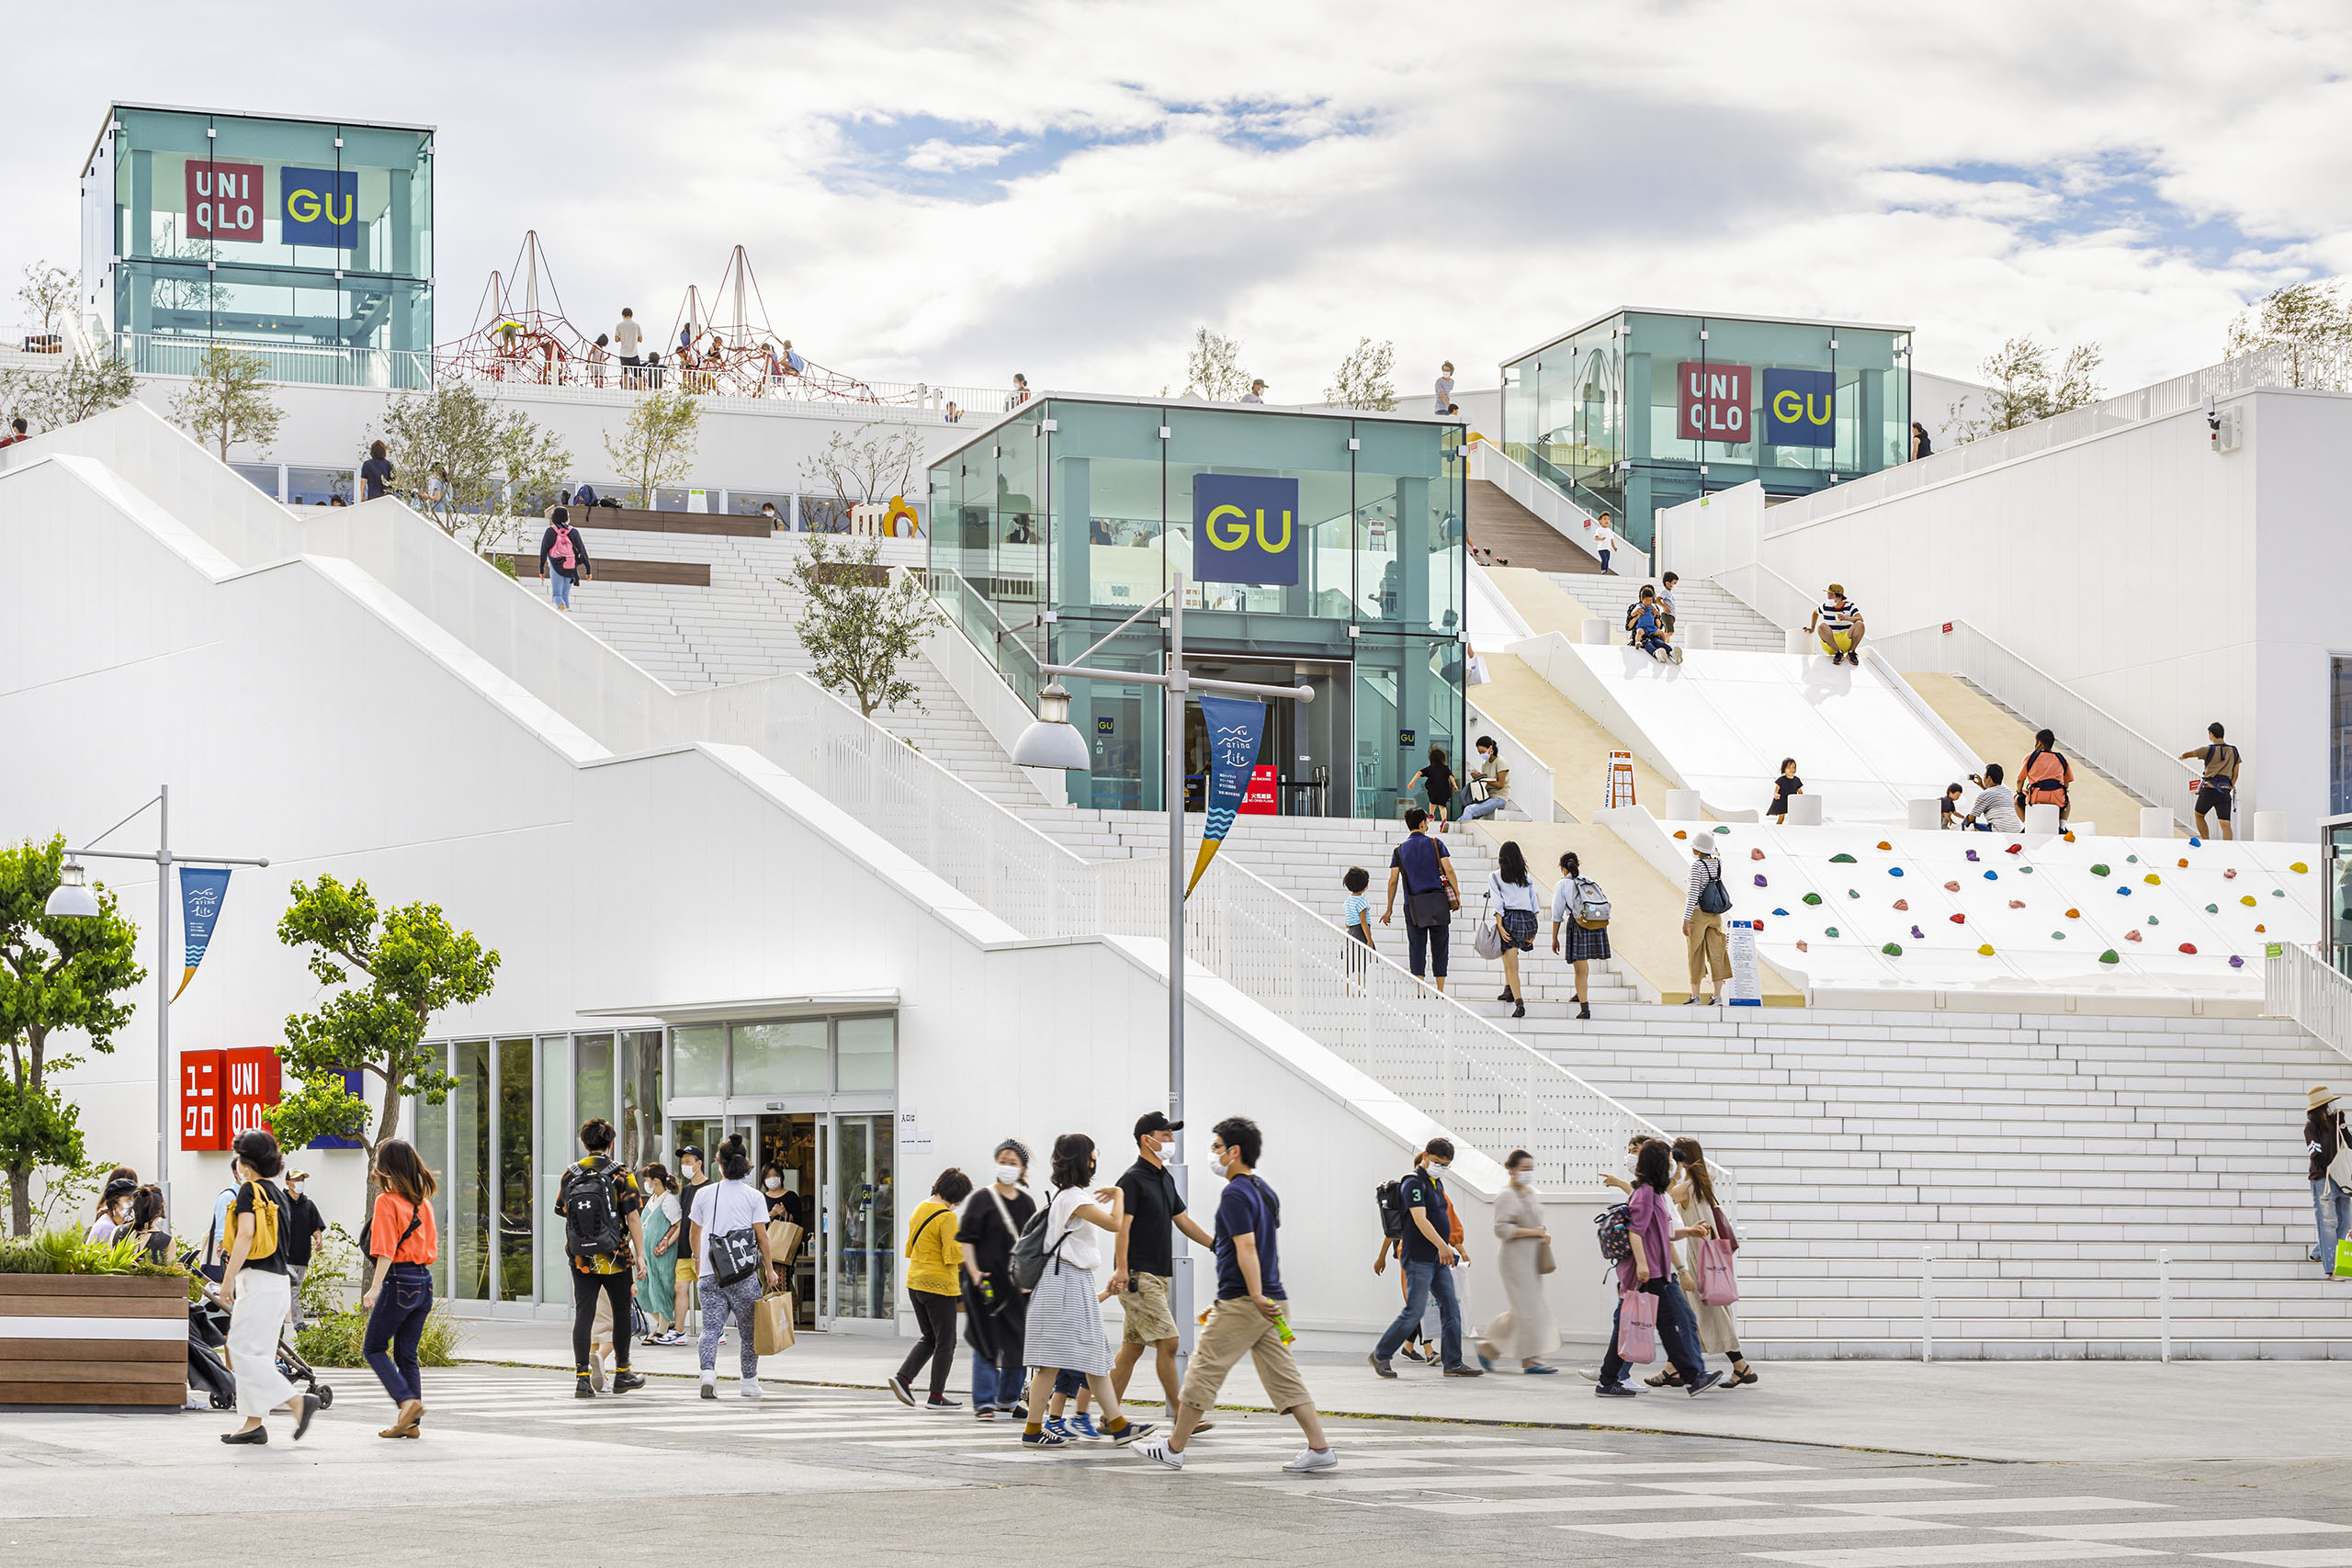 Uniqlo Park Japan This Uniqlo Concept Store In Yokohama Is An Epic  3Storey Playground  Klook Travel Blog